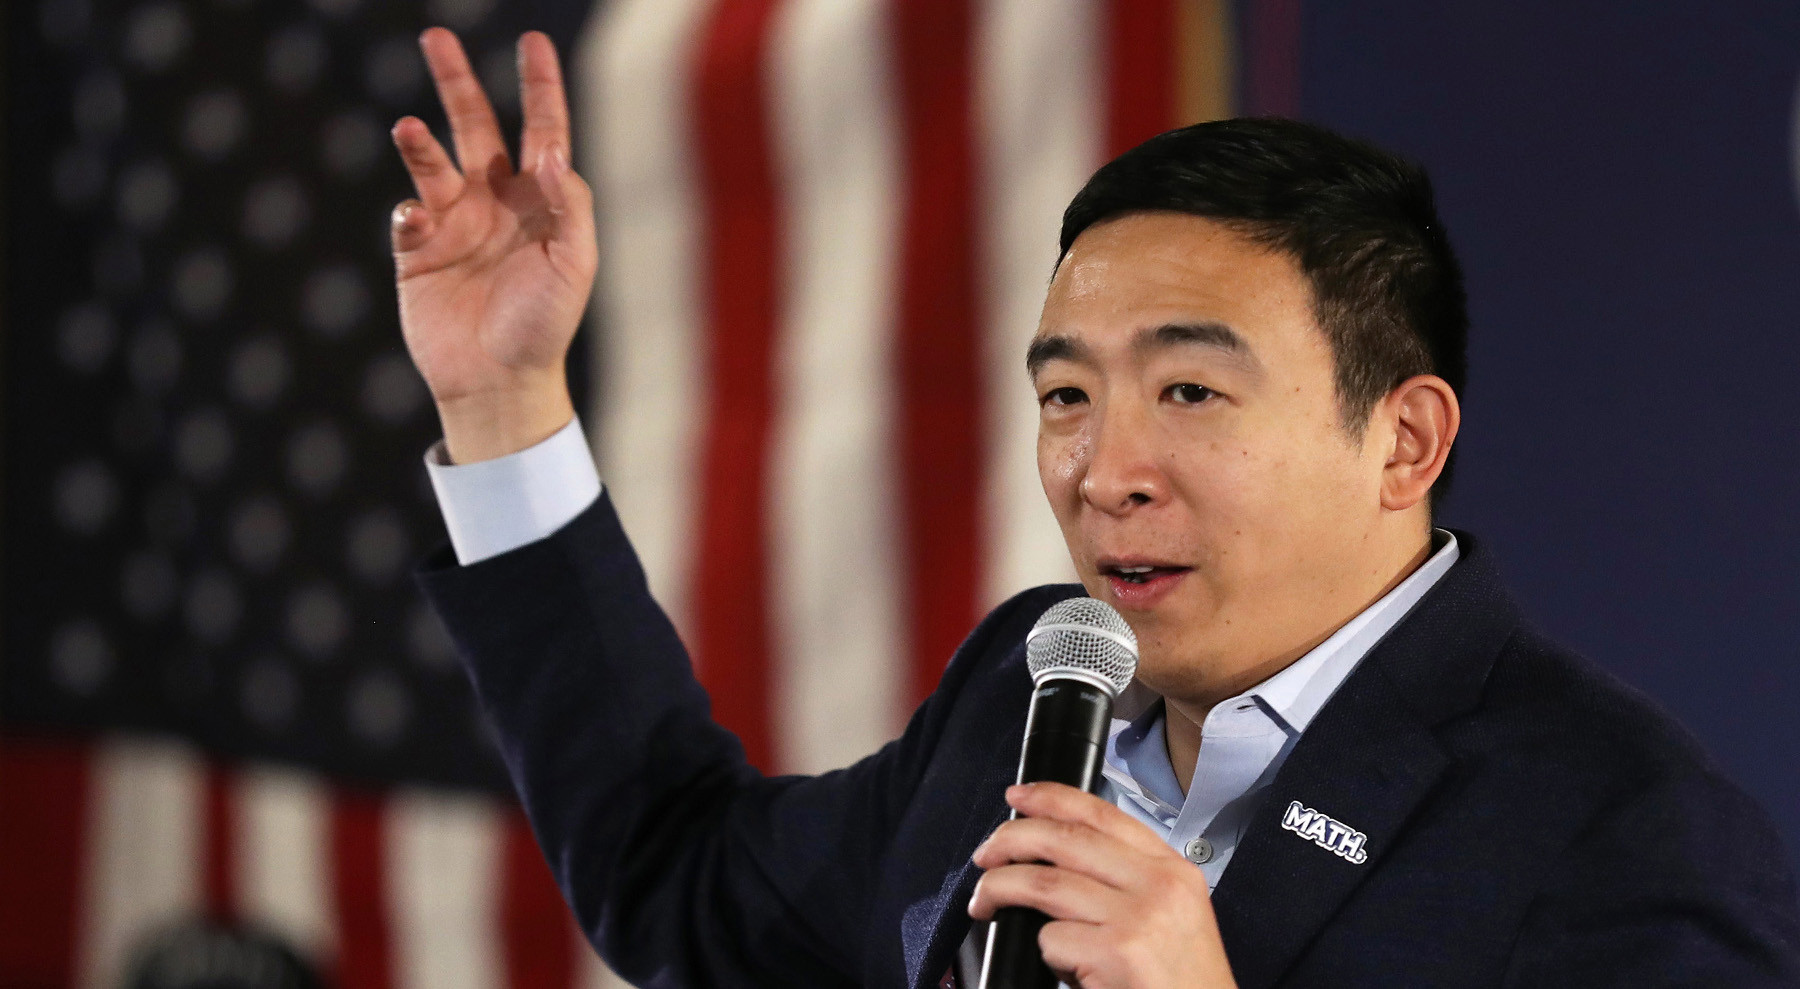 Andrew Yang is a Politician for the Future